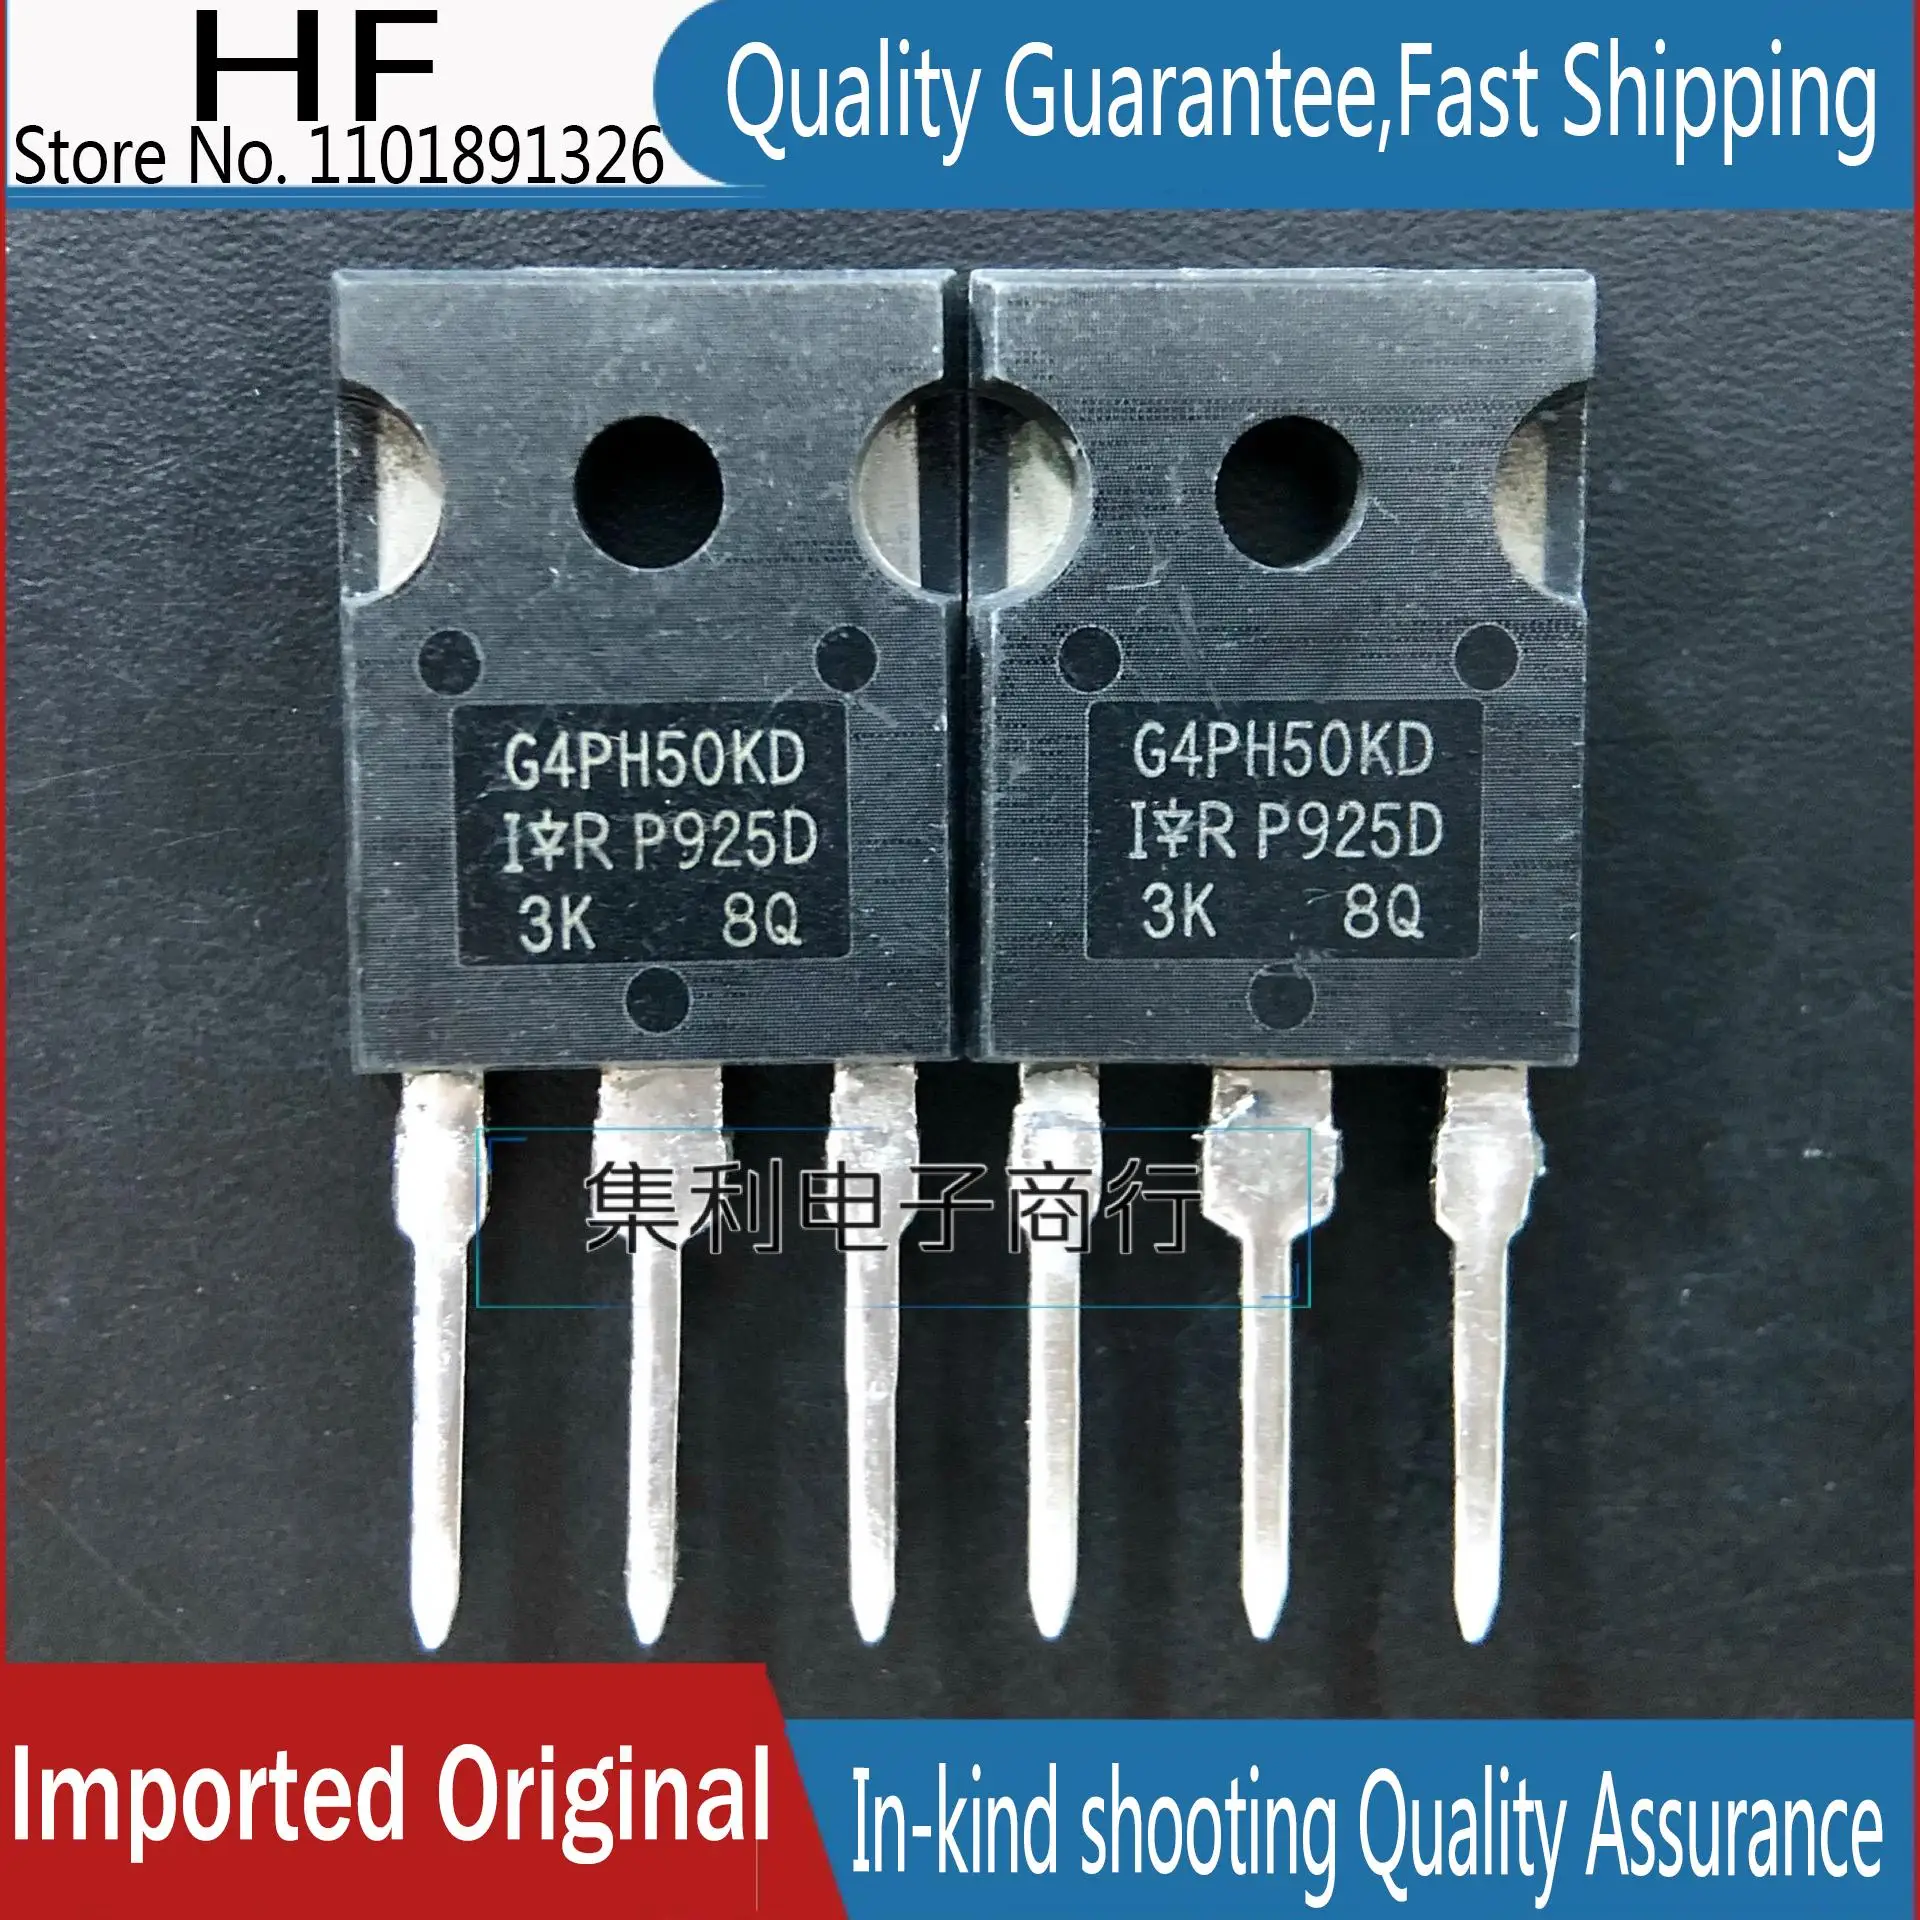 

10PCS/lot G4PH50KD IRG4PH50KD 45A/1200V Imported Original In Stock Fast Shipping Quality Guarantee